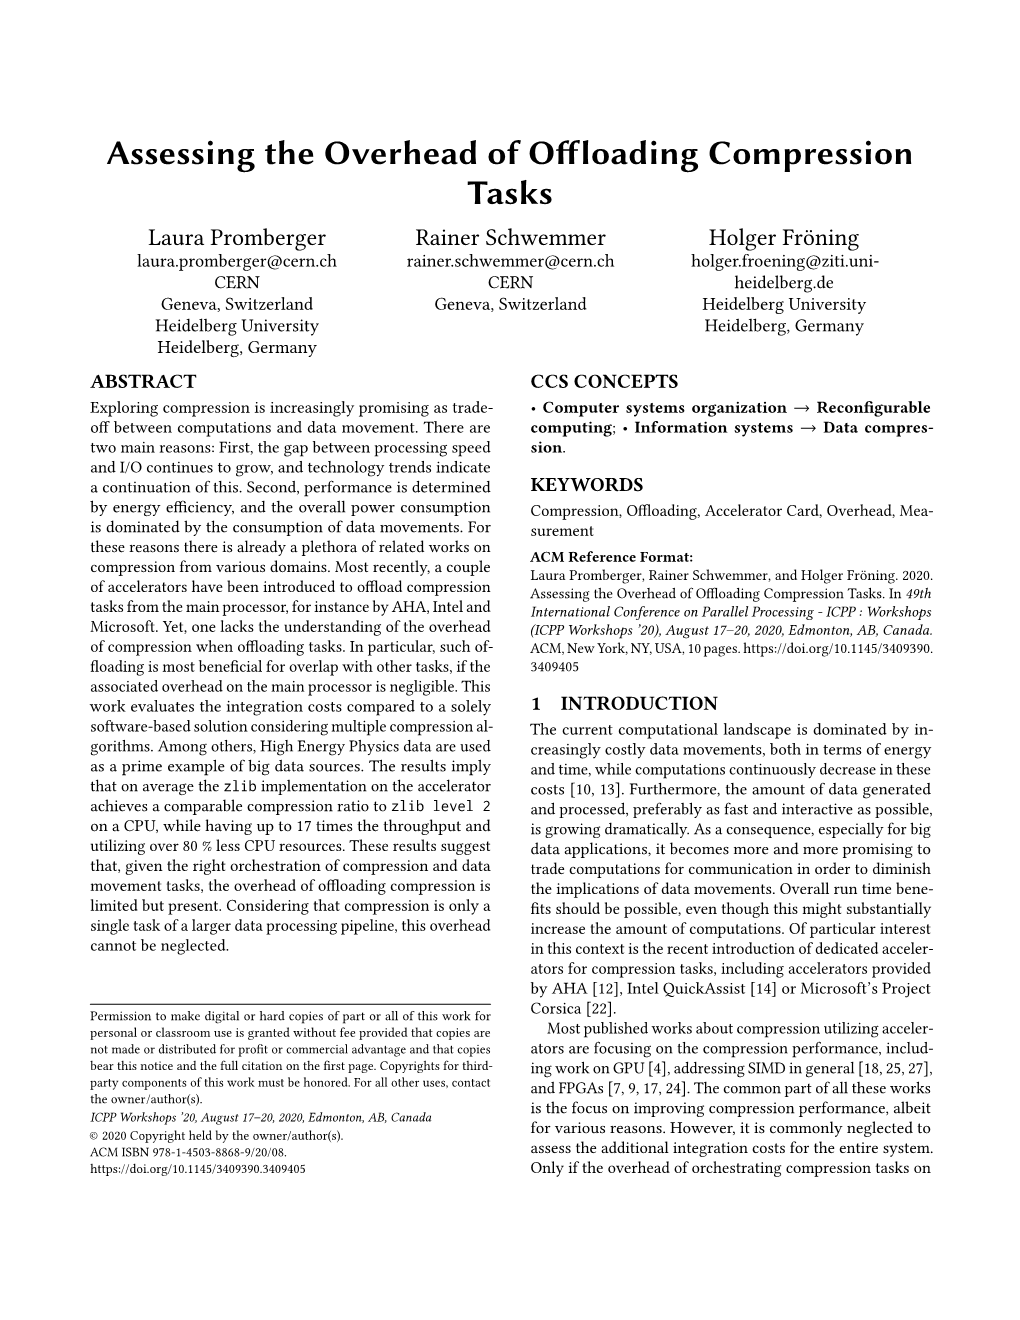 Assessing the Overhead of Offloading Compression Tasks